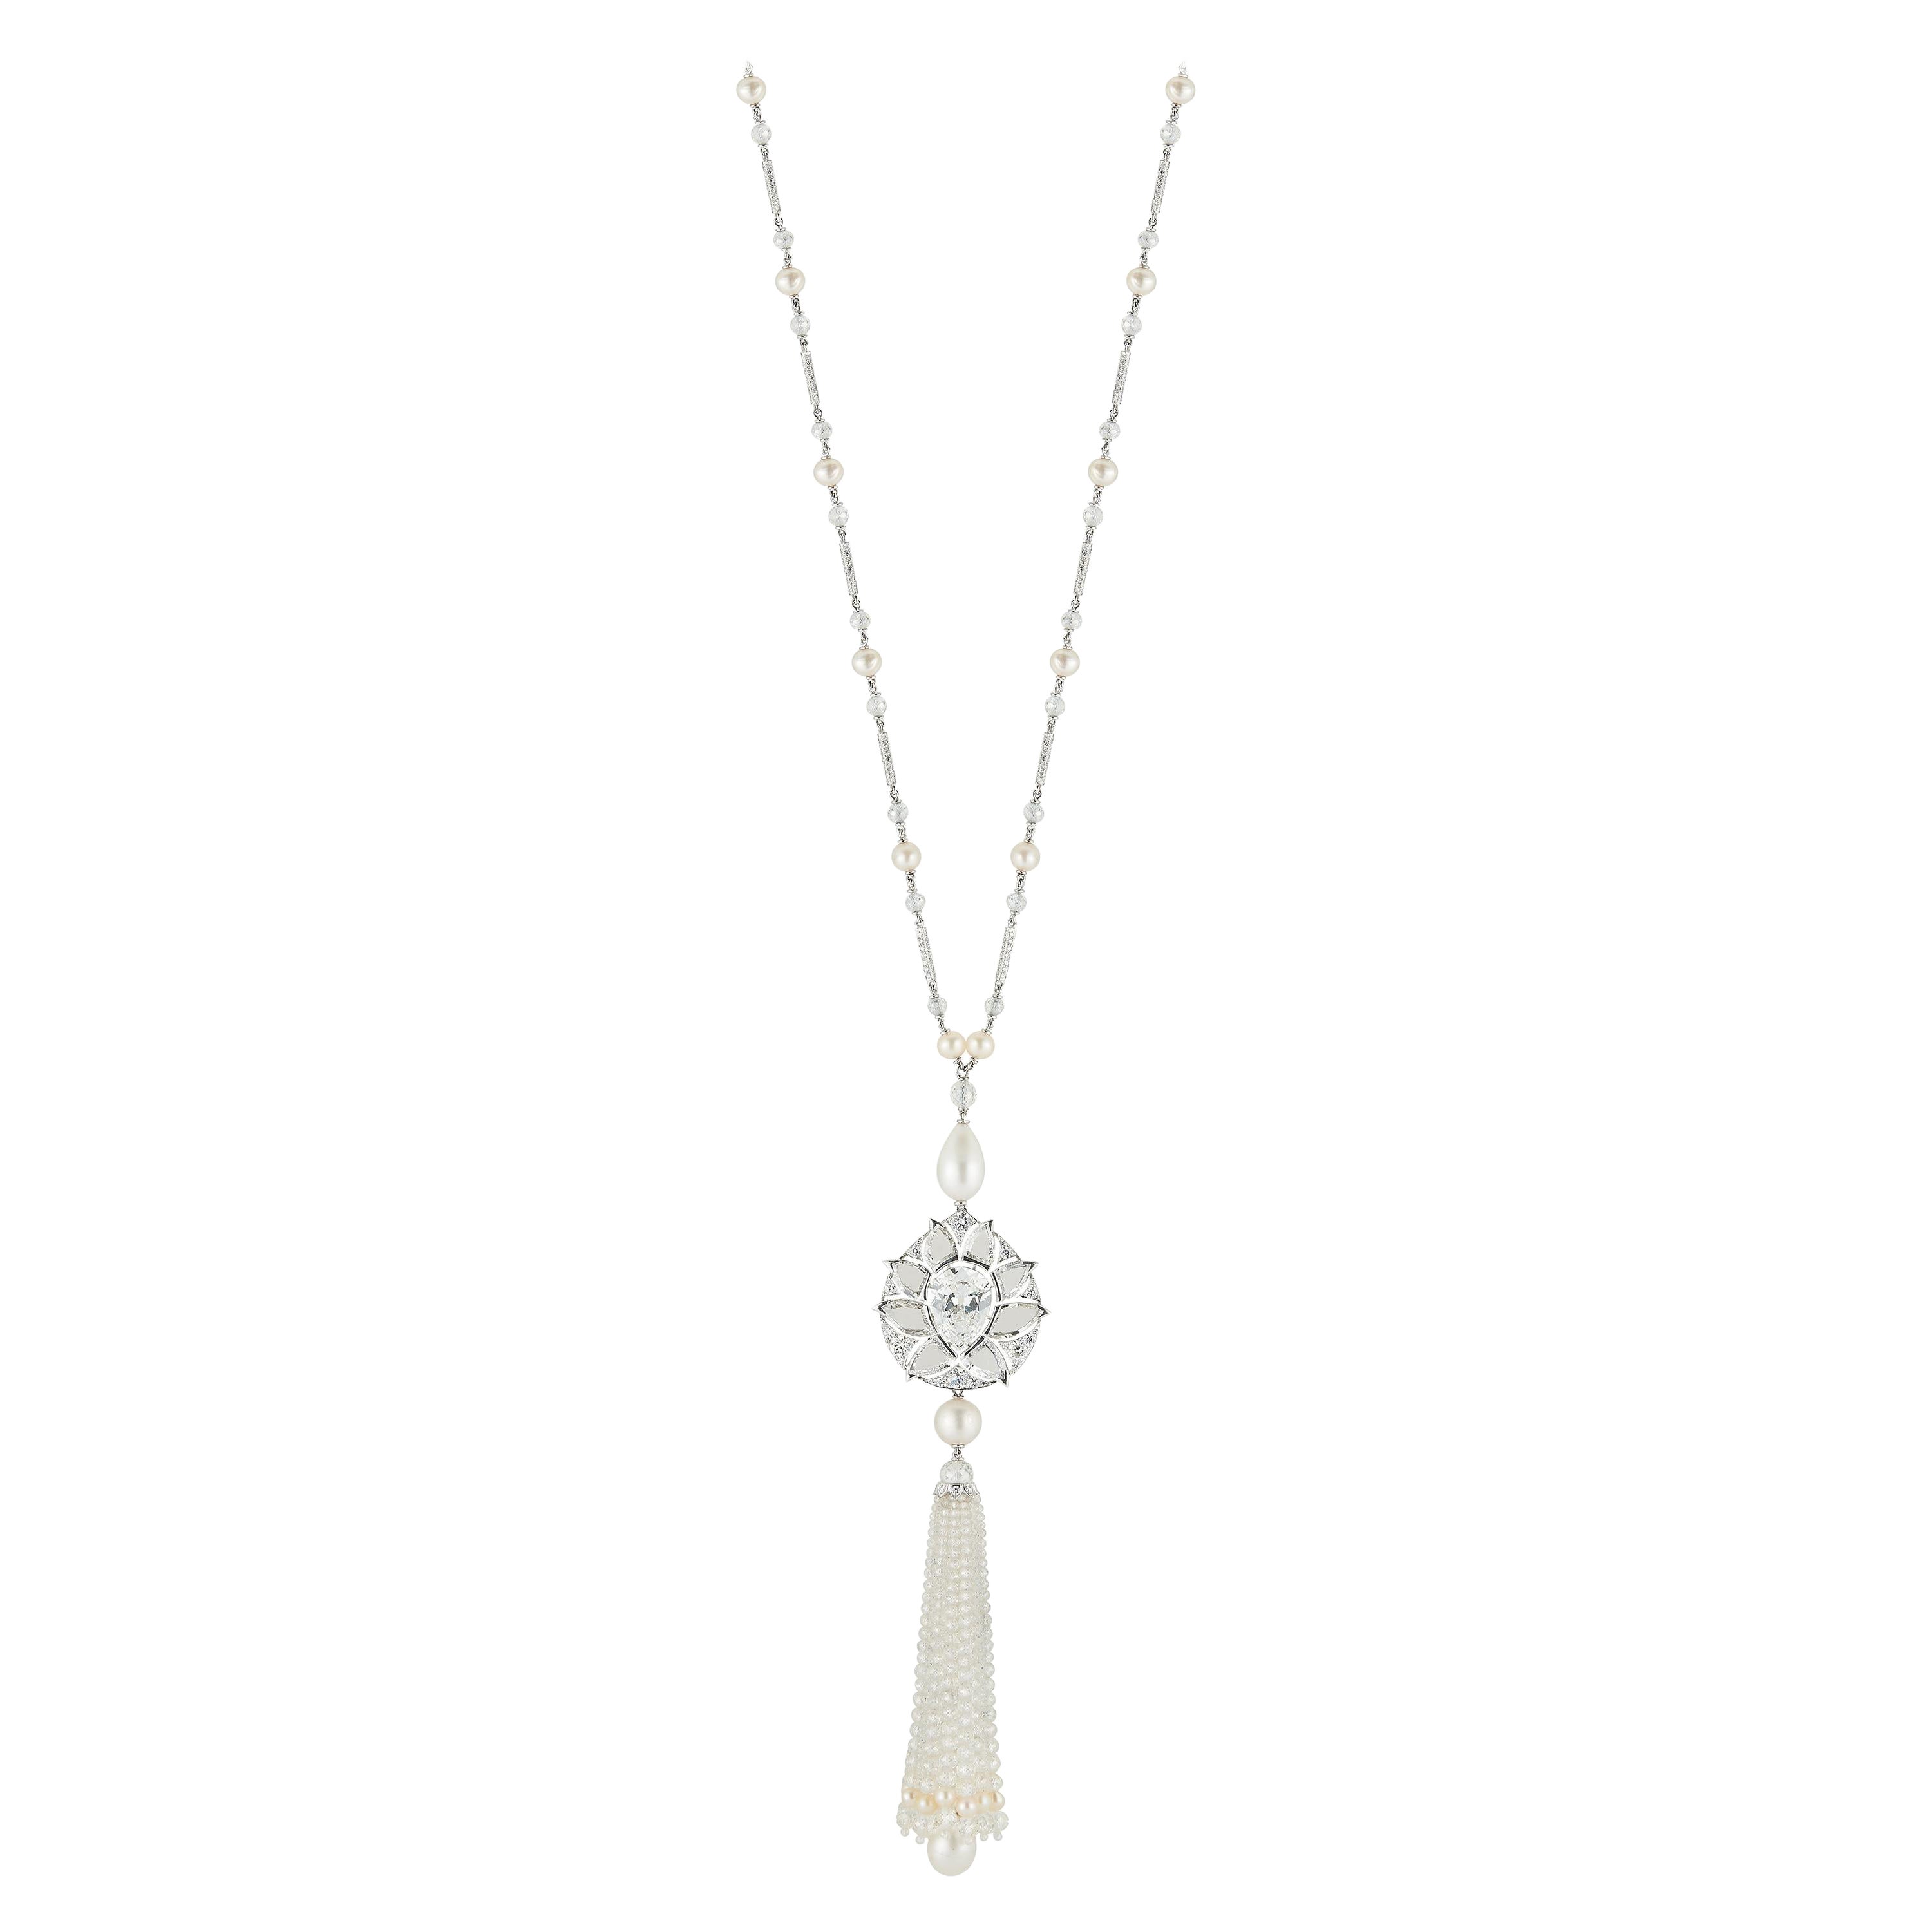 Diamond and Natural Pearl Tassel Sautoir Necklace Masterpiece by Viren Bhagat